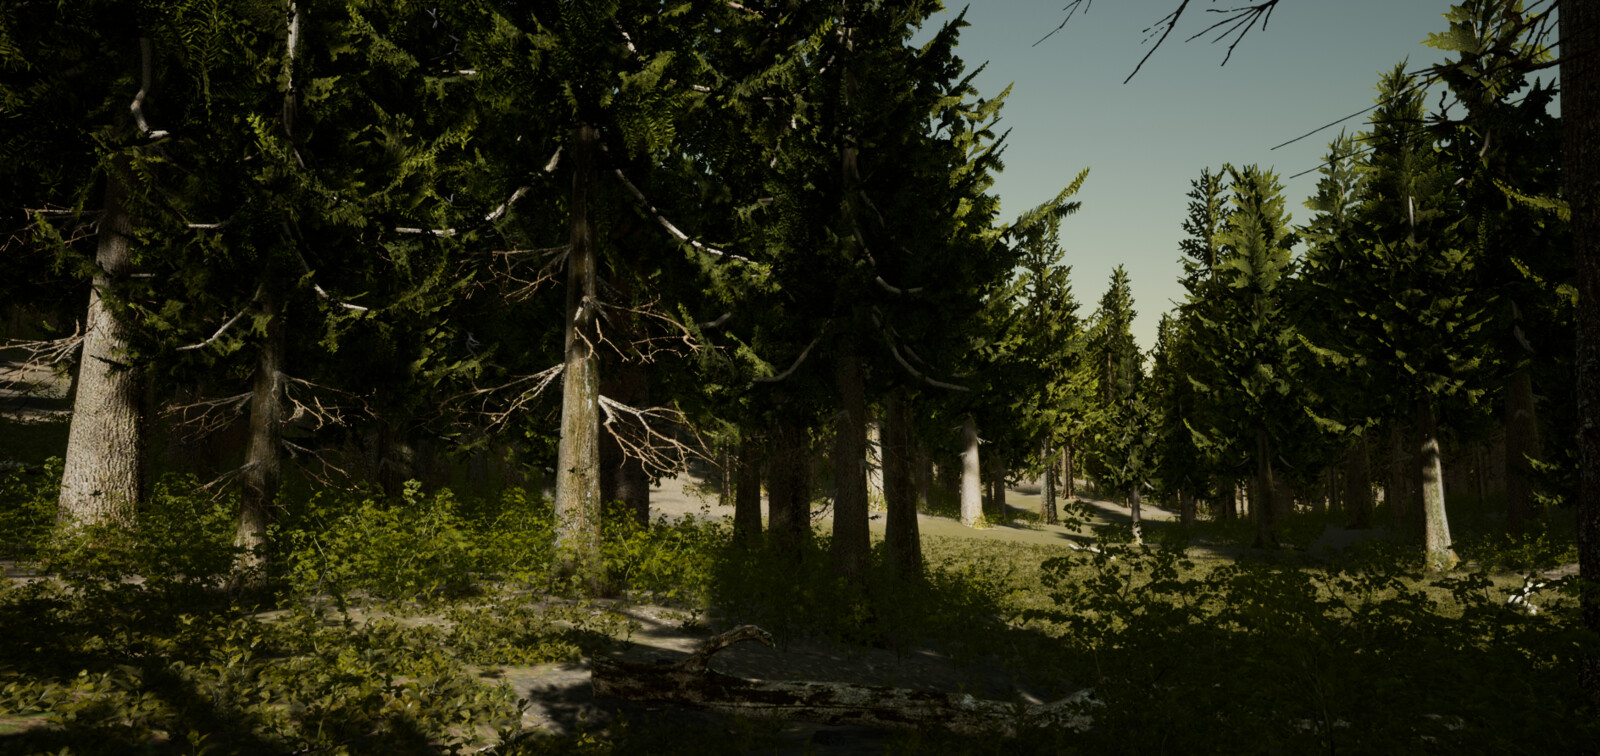 Procedurally generated forest. Zero hand placement.